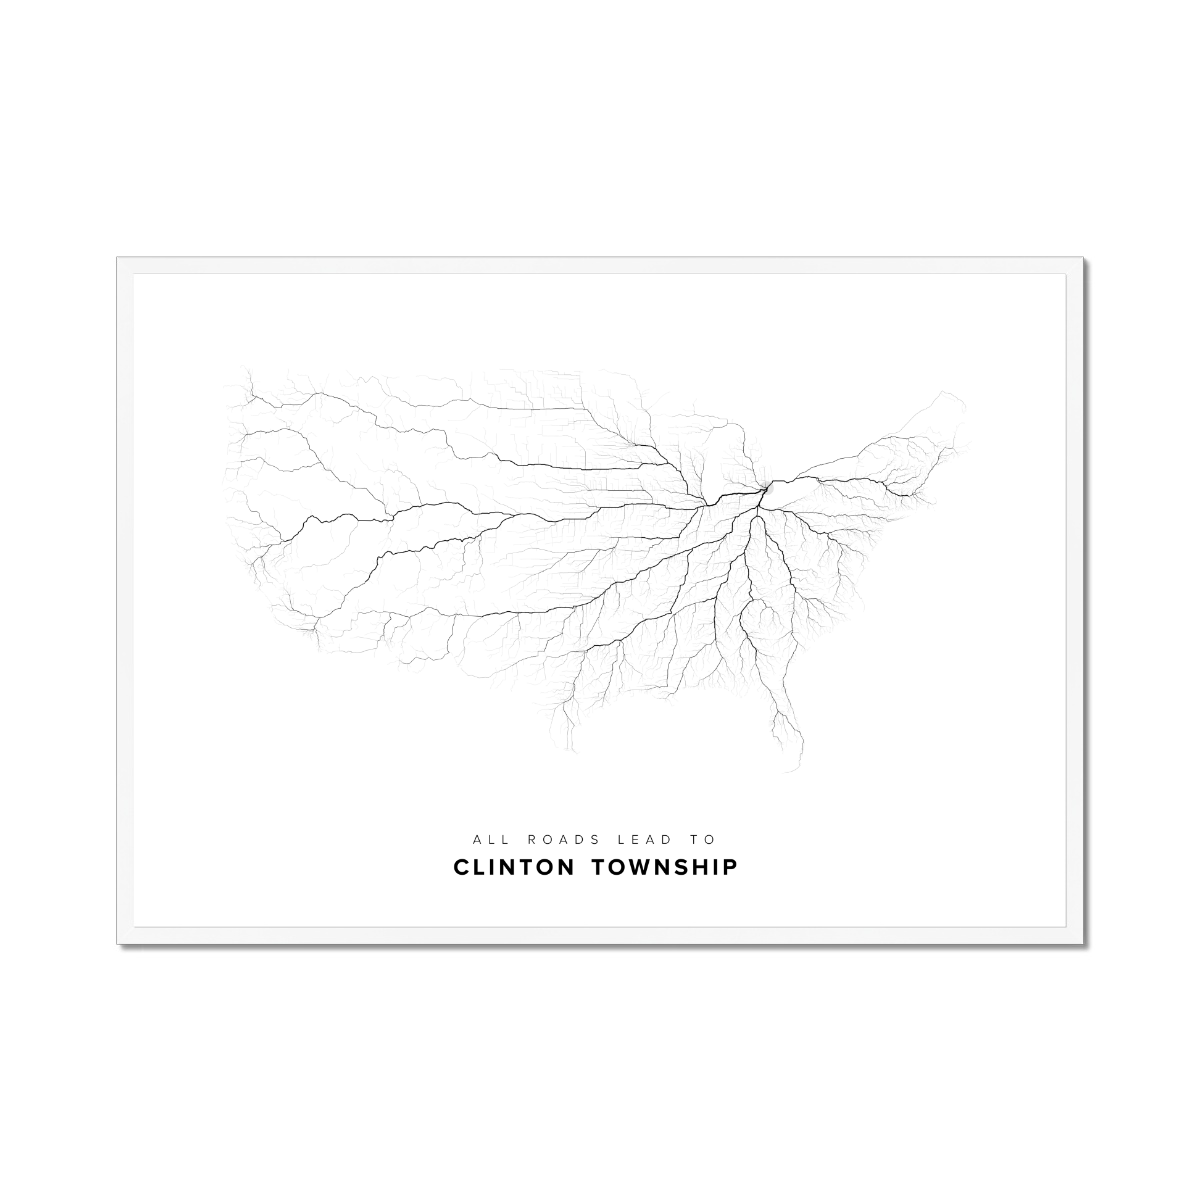 All roads lead to Clinton Township (United States of America) Fine Art Map Print